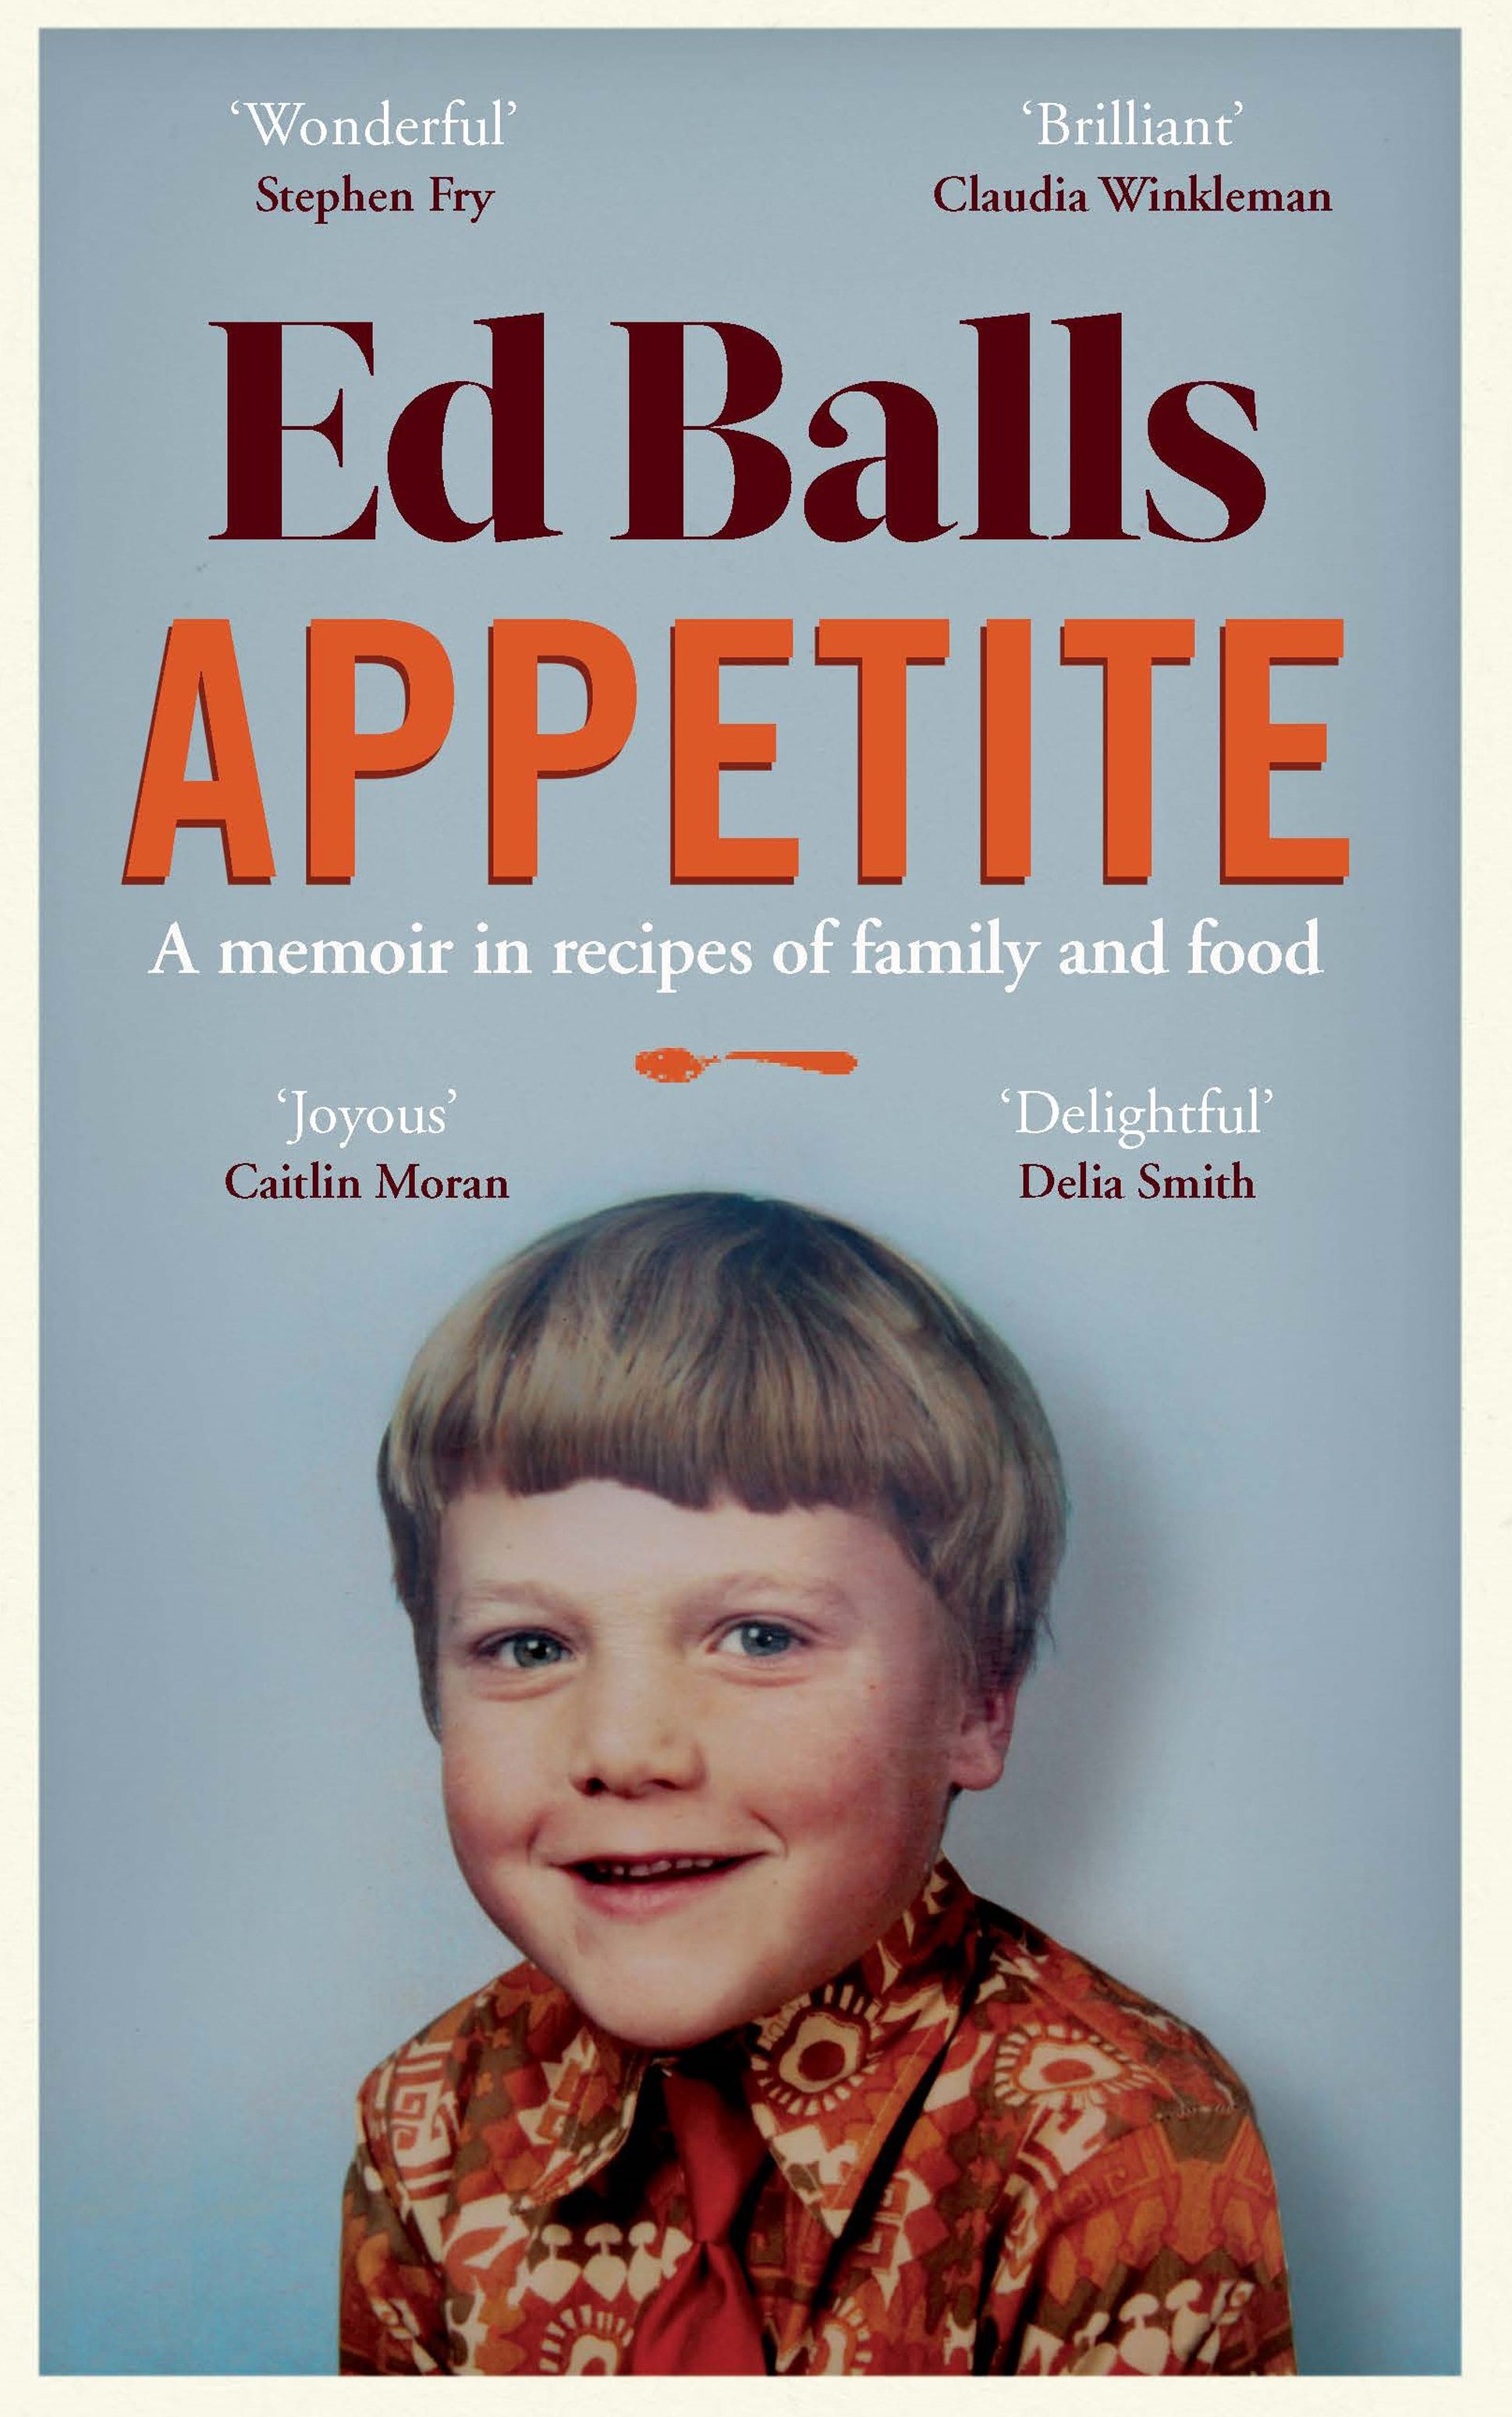 Appetite by ed balls (gallery books uk/pa)